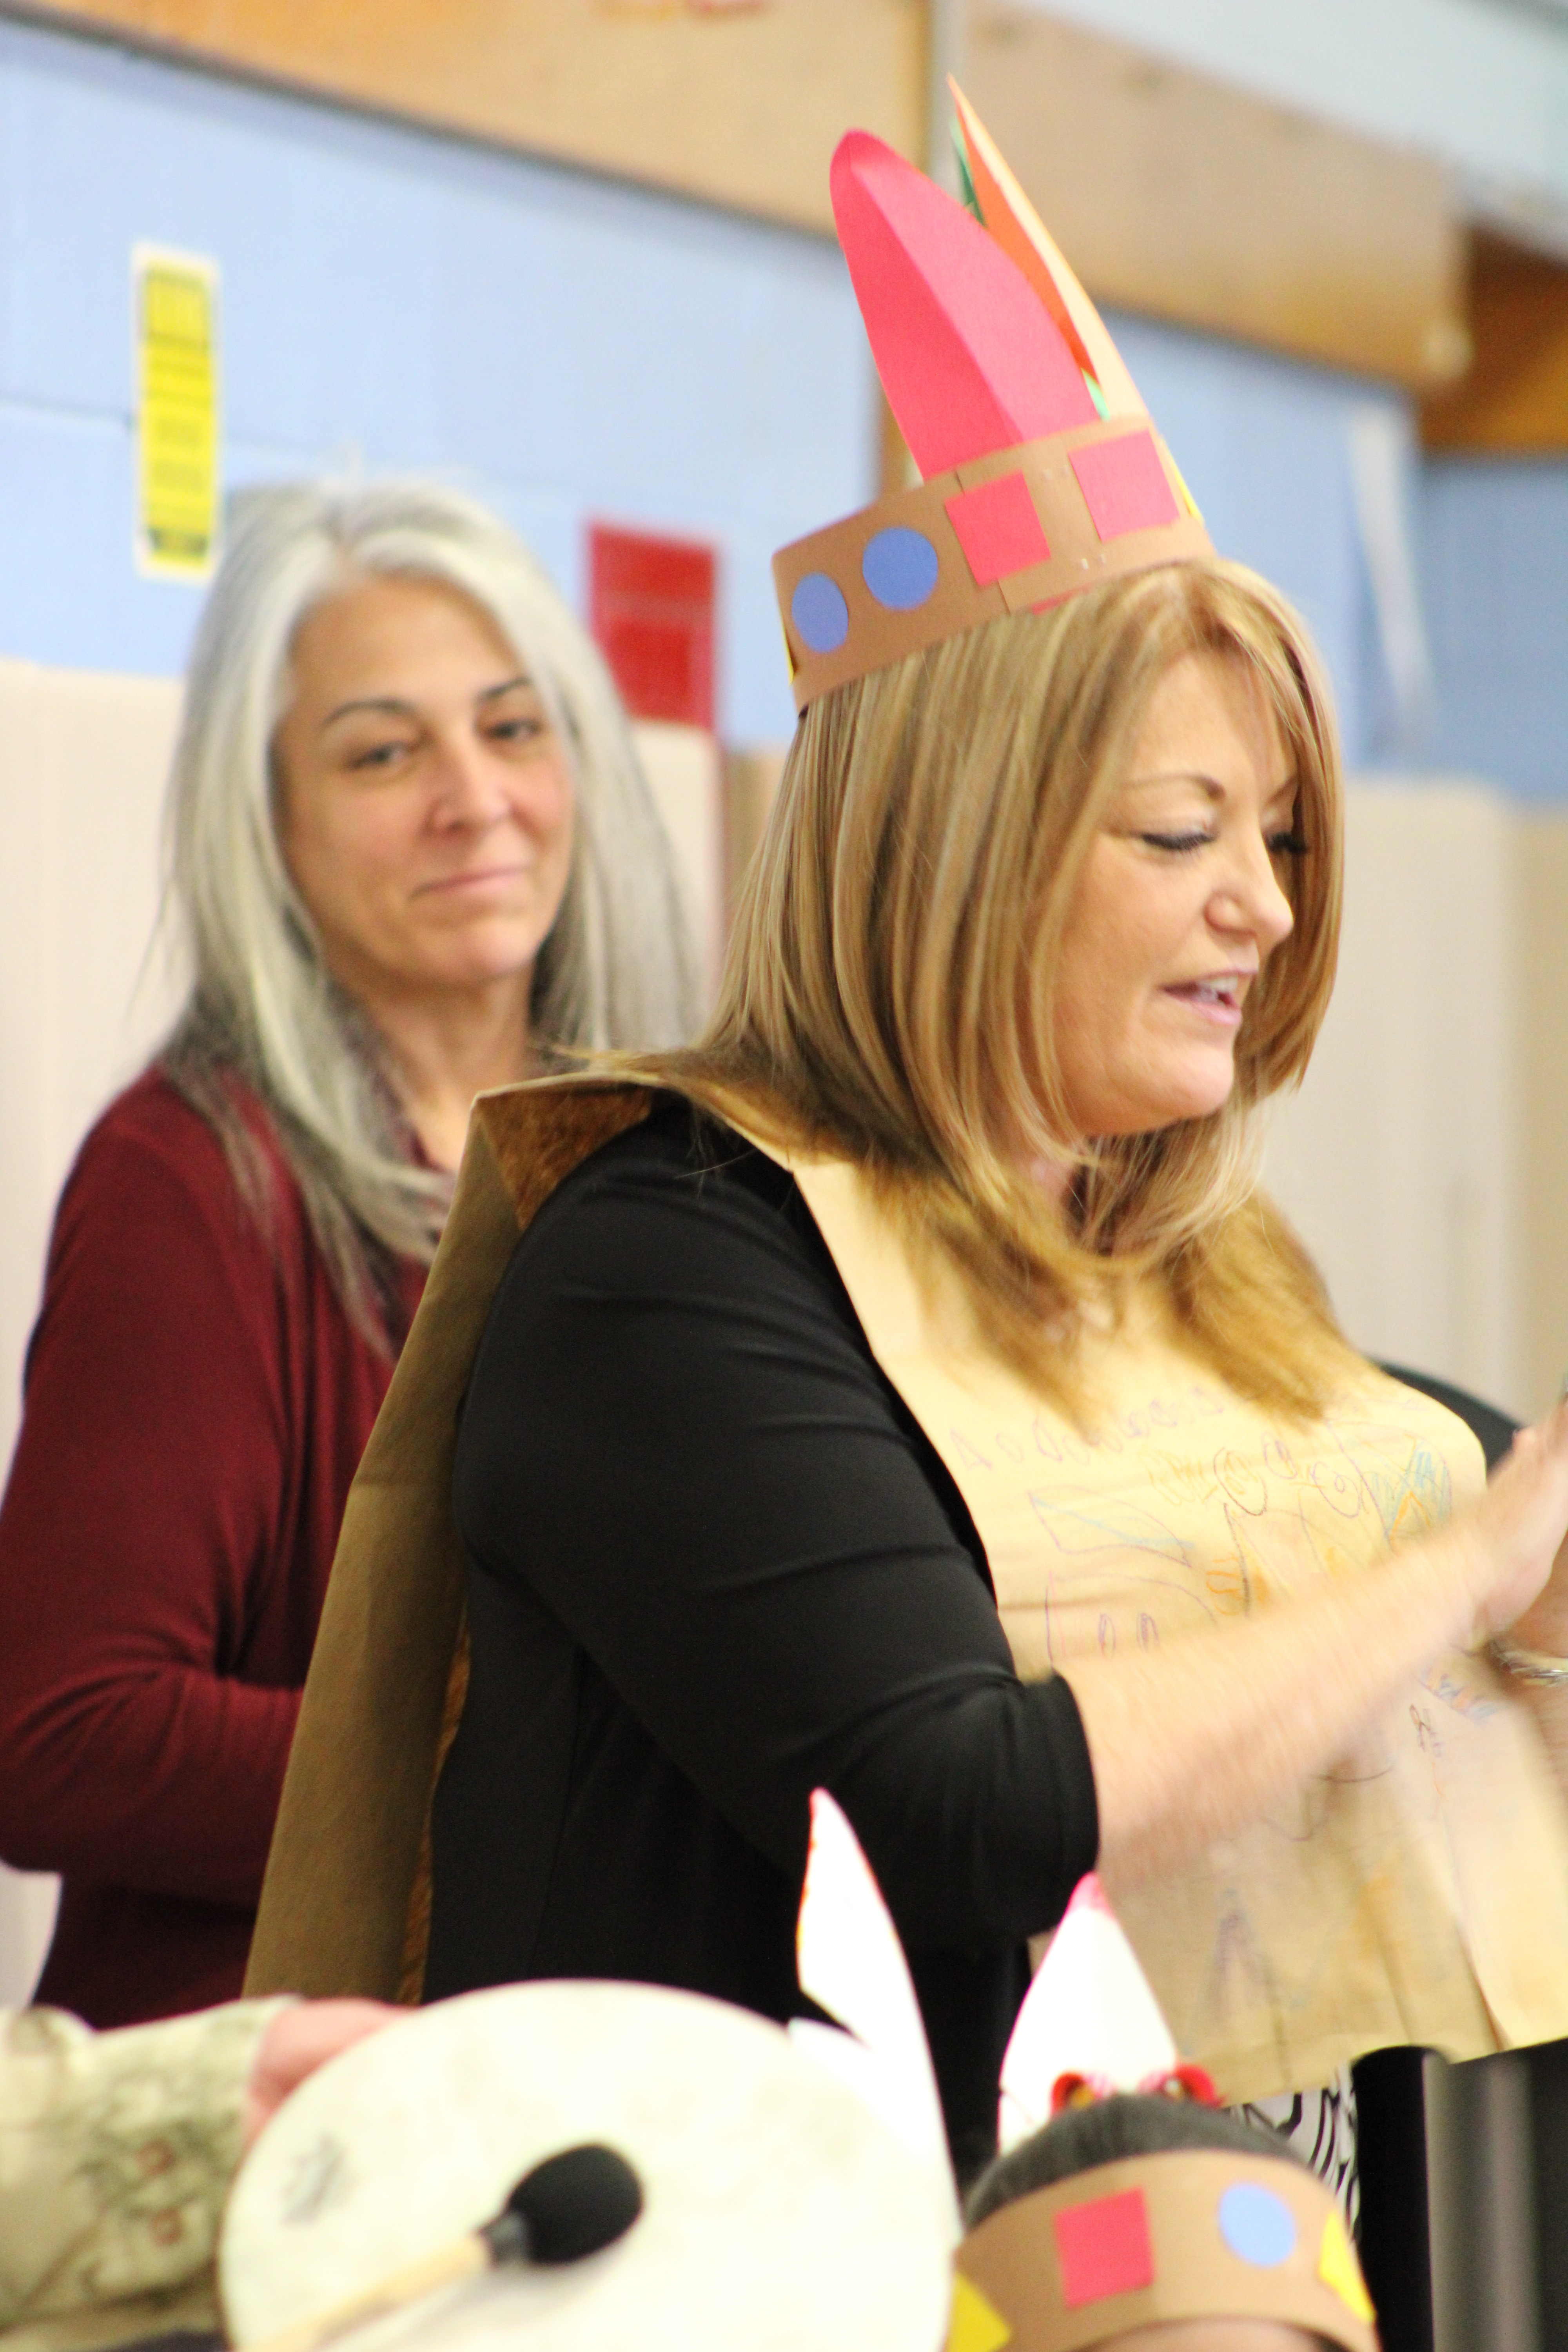 The Remsenburg-Speonk Elementary School hosted its Thanksgiving event on Thursday. 